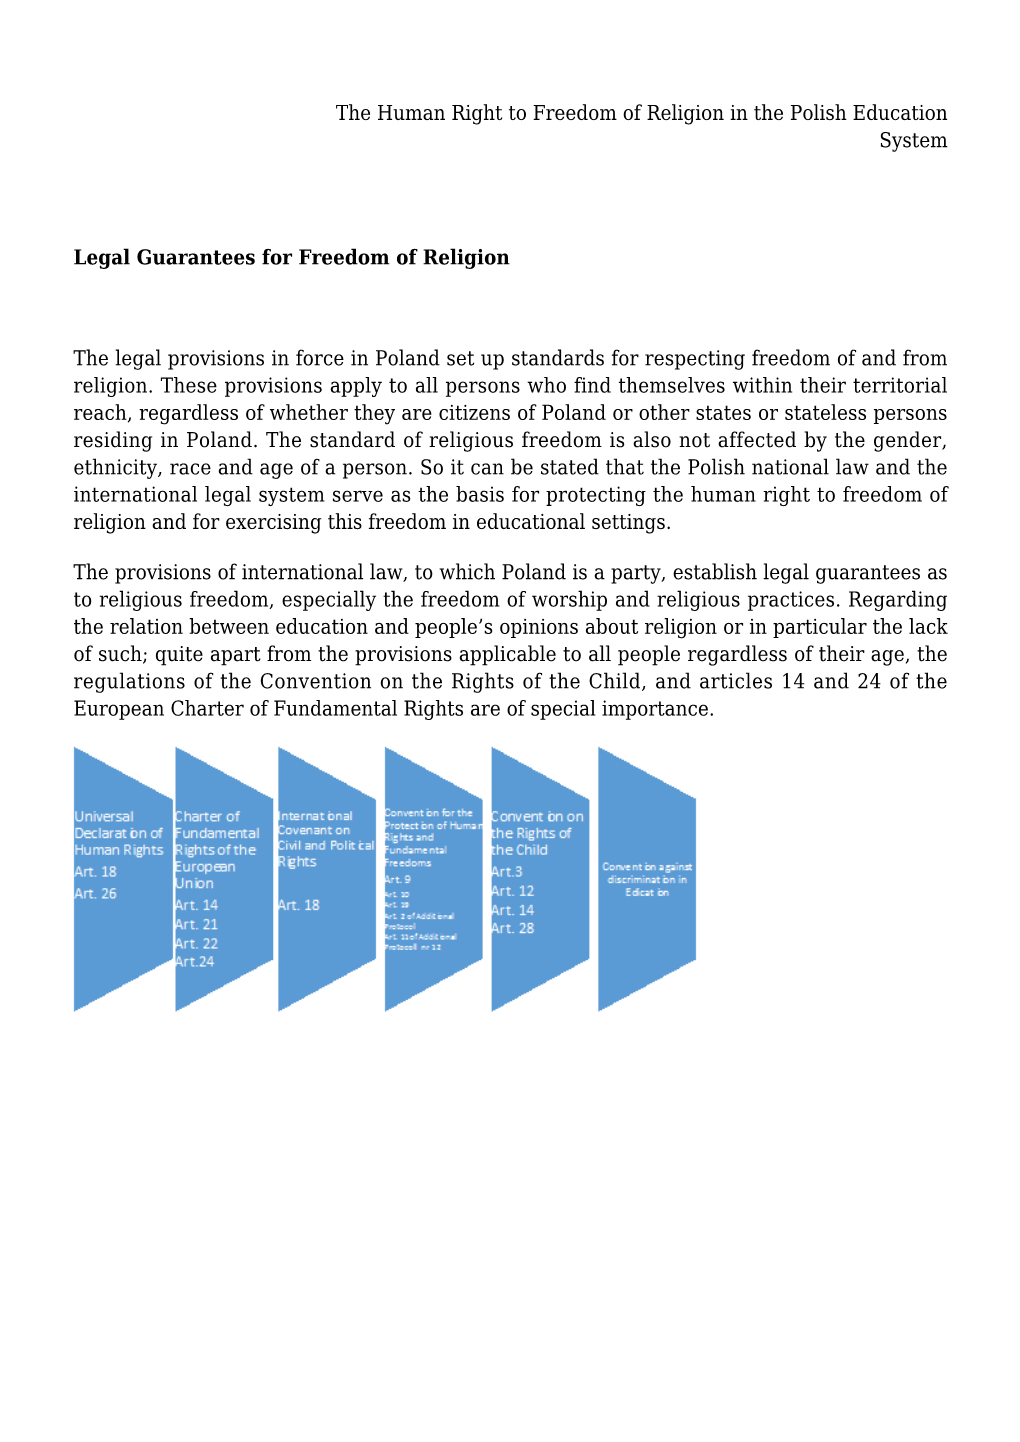 The Human Right to Freedom of Religion in the Polish Education System